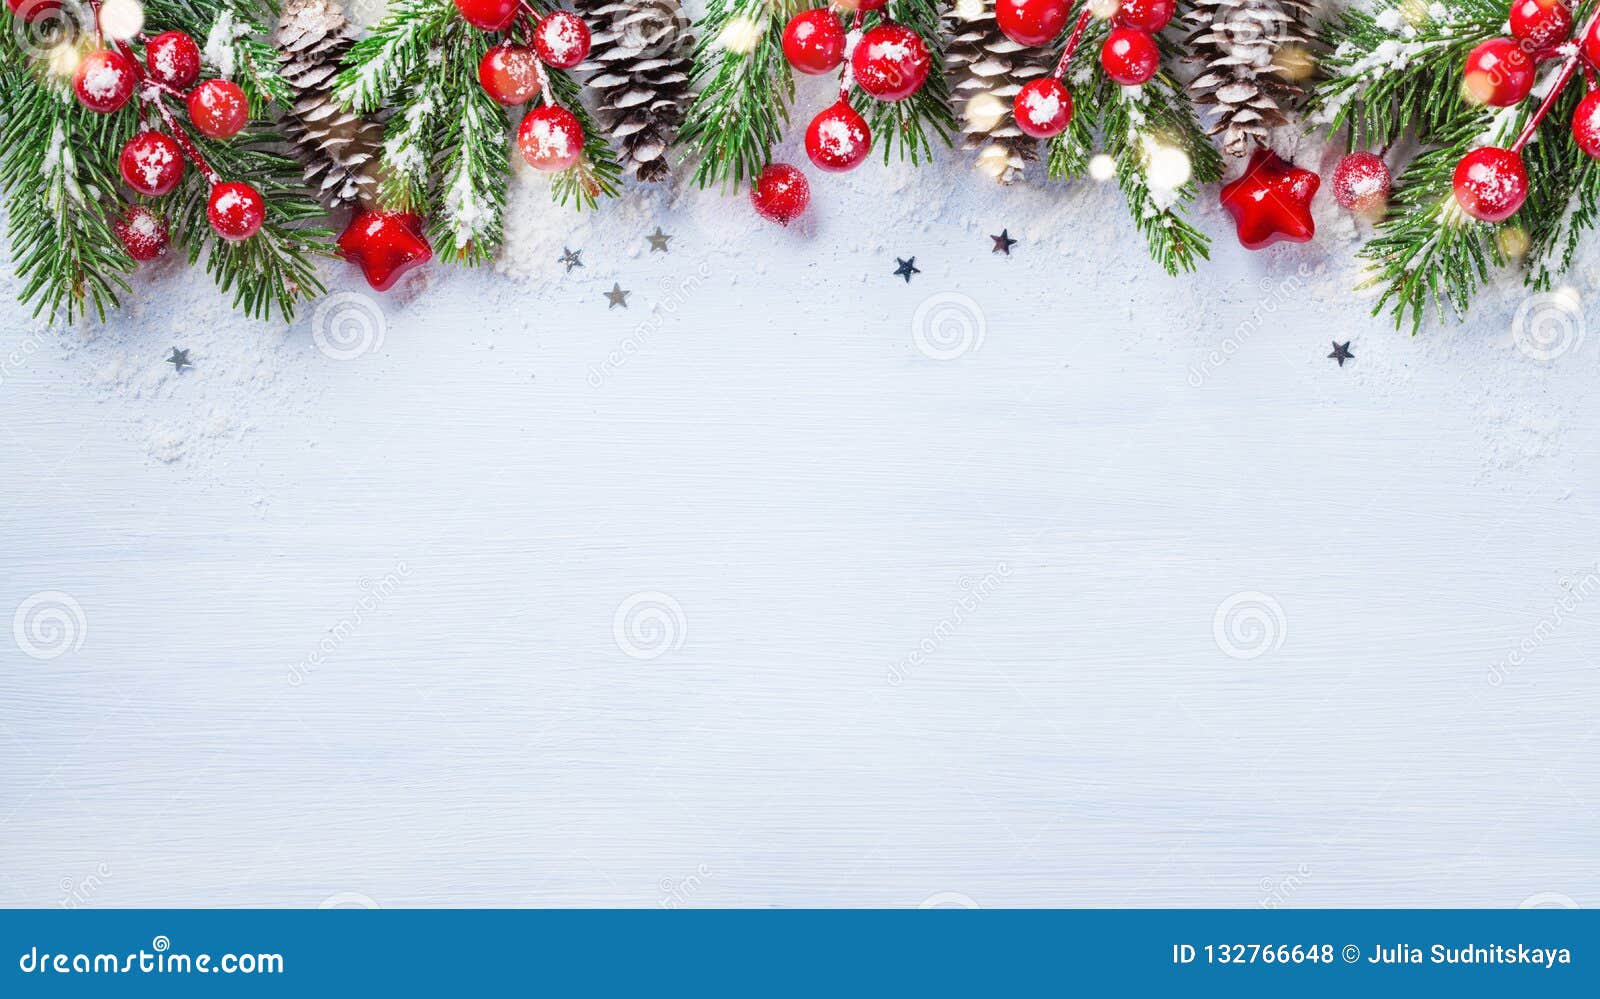 christmas background with snowy fir branches, cones and bokeh lights. holiday banner or card